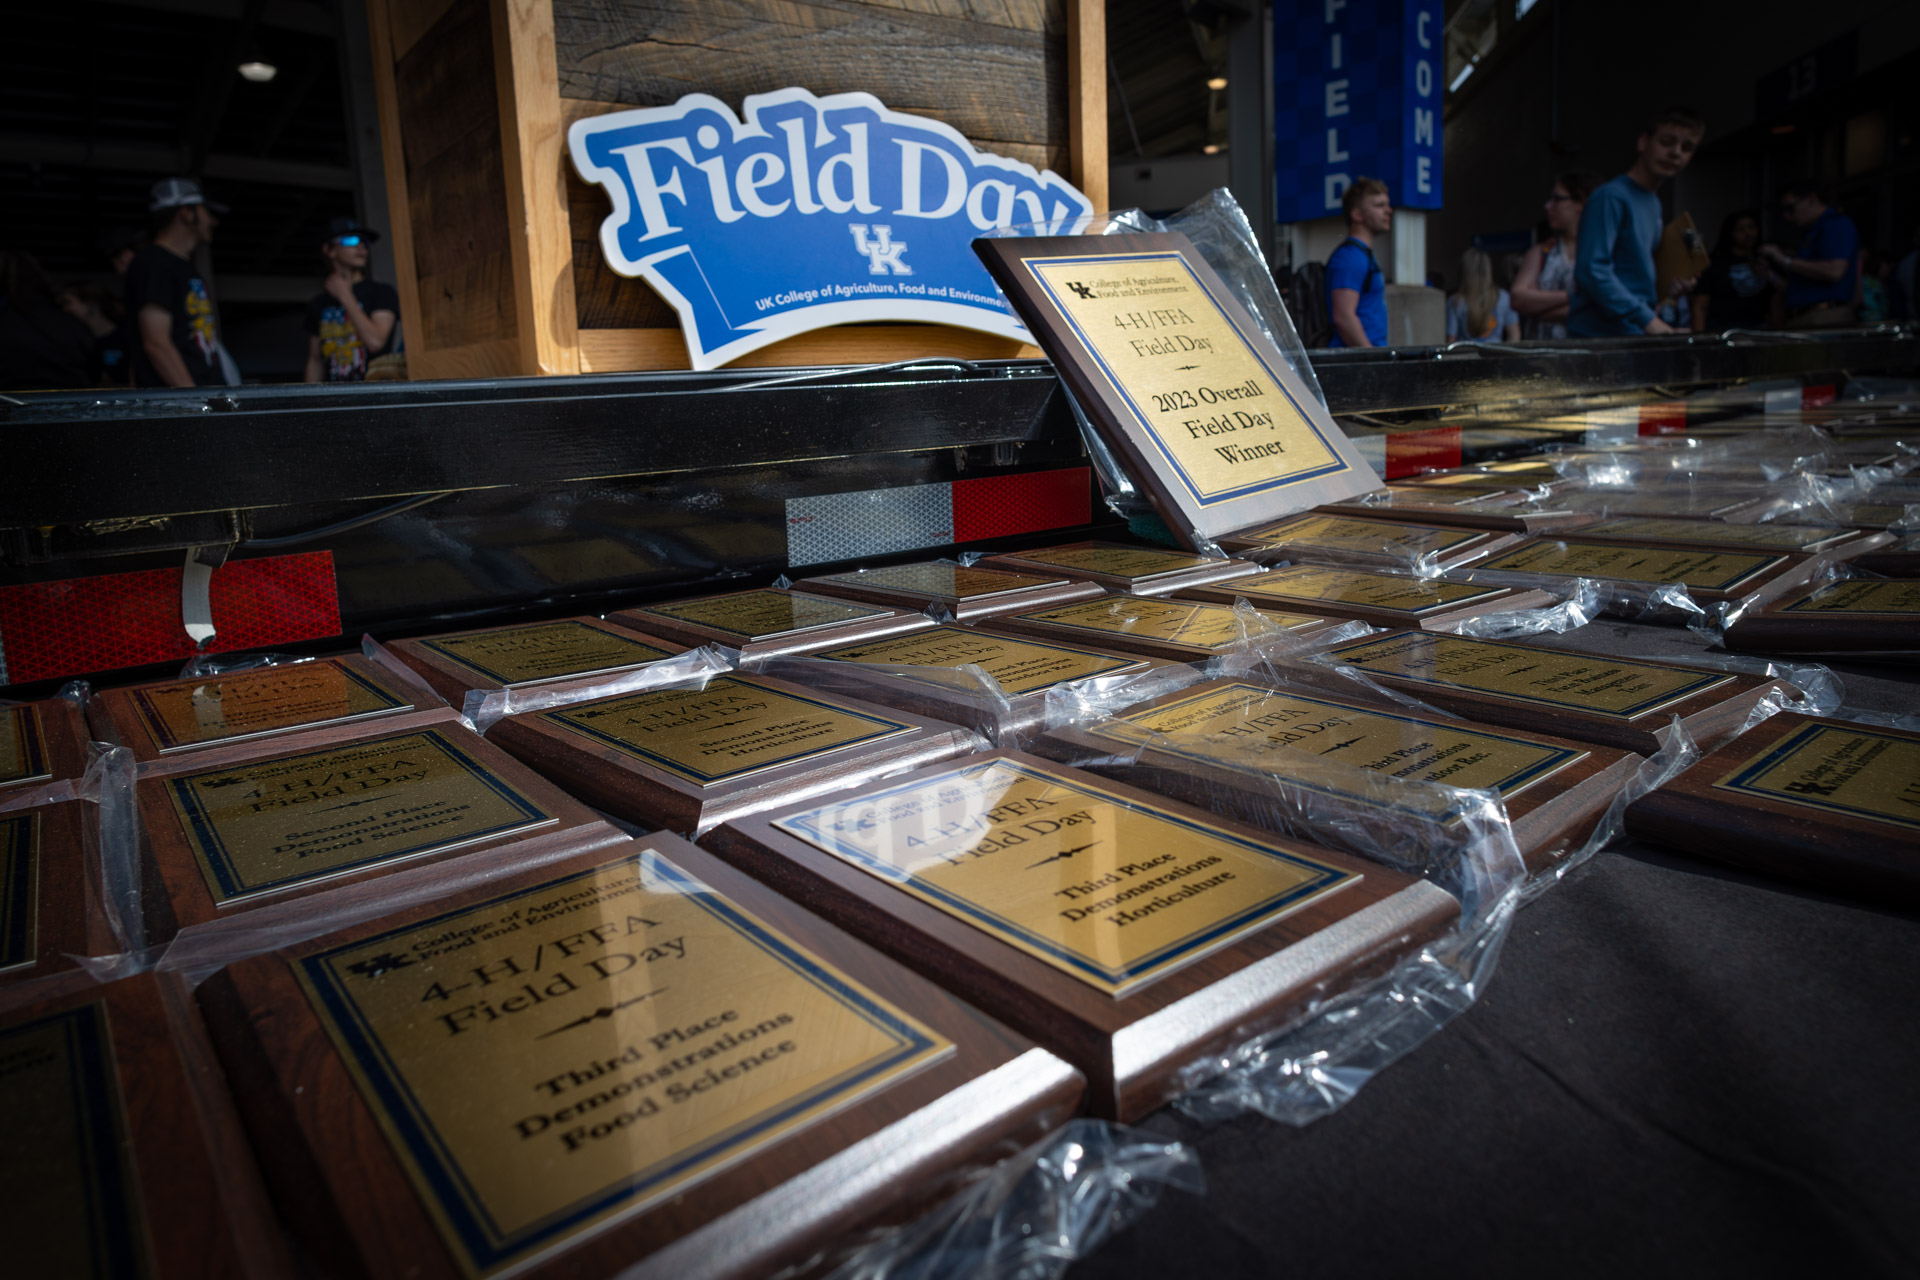 Image of UK Field Day Awards laying on a table with the Field Day logo sign behind them